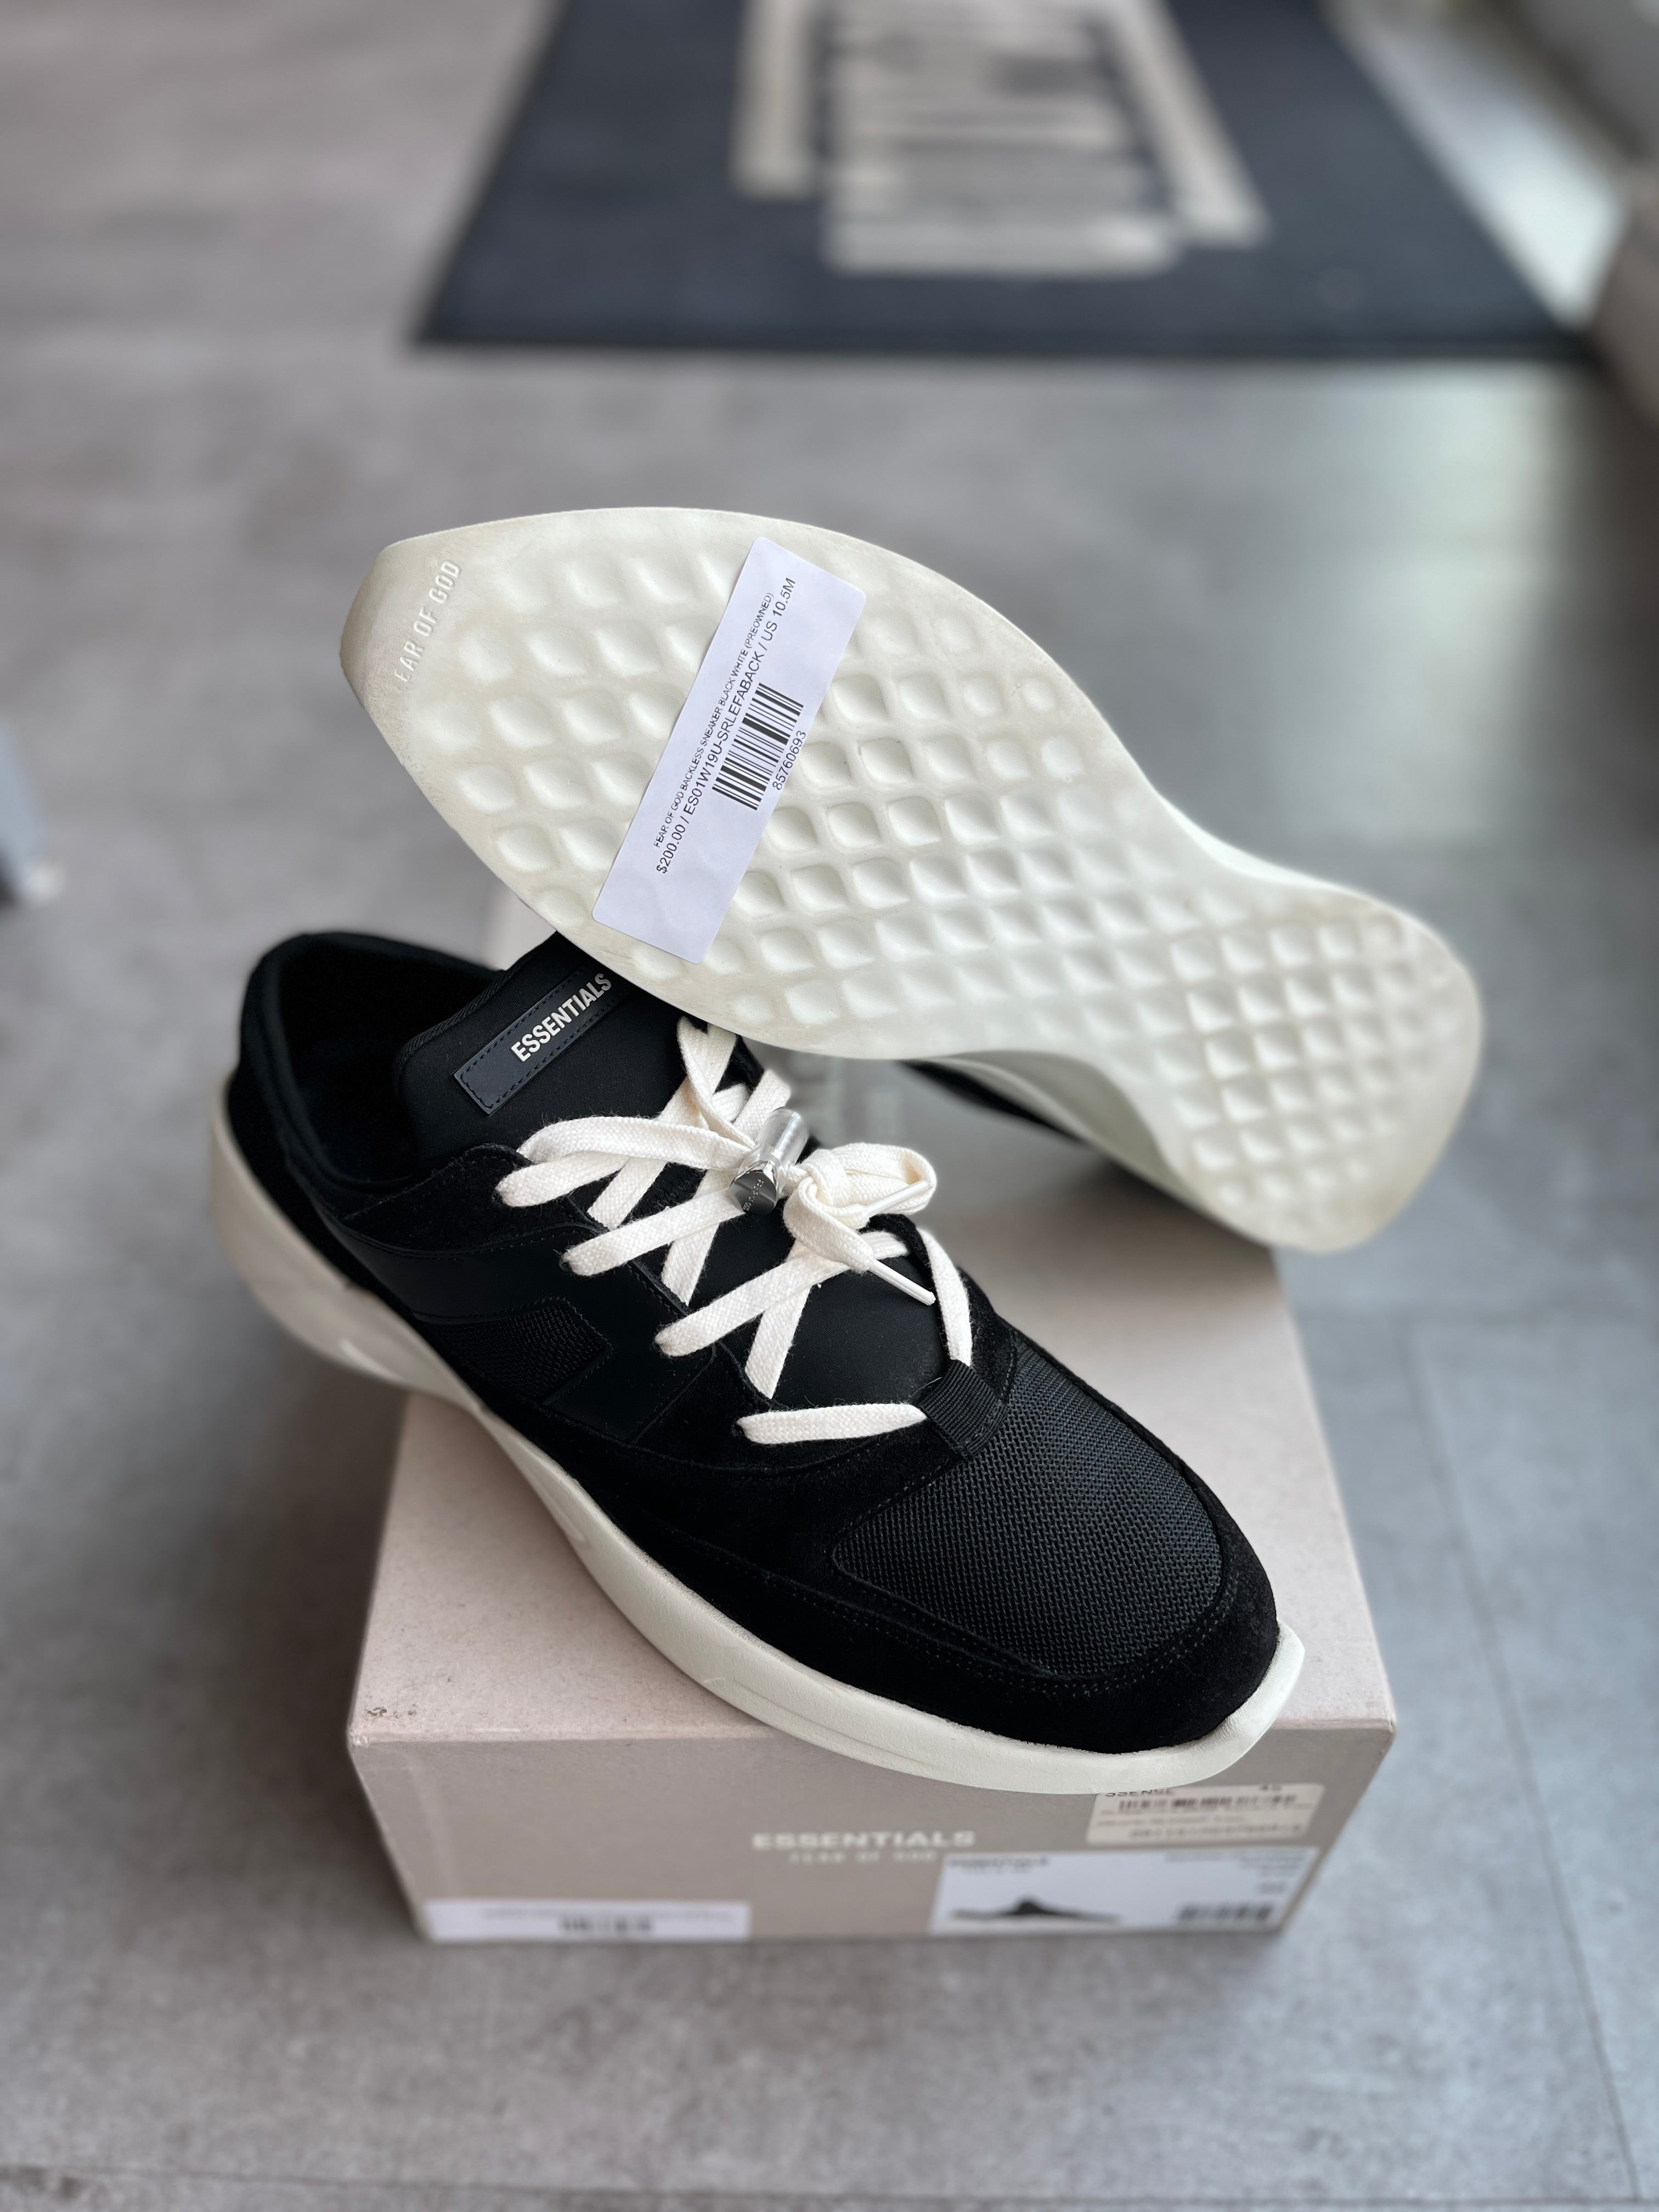 Fear of God ESSENTIALS Sneakers Are on Sale at SSENSE